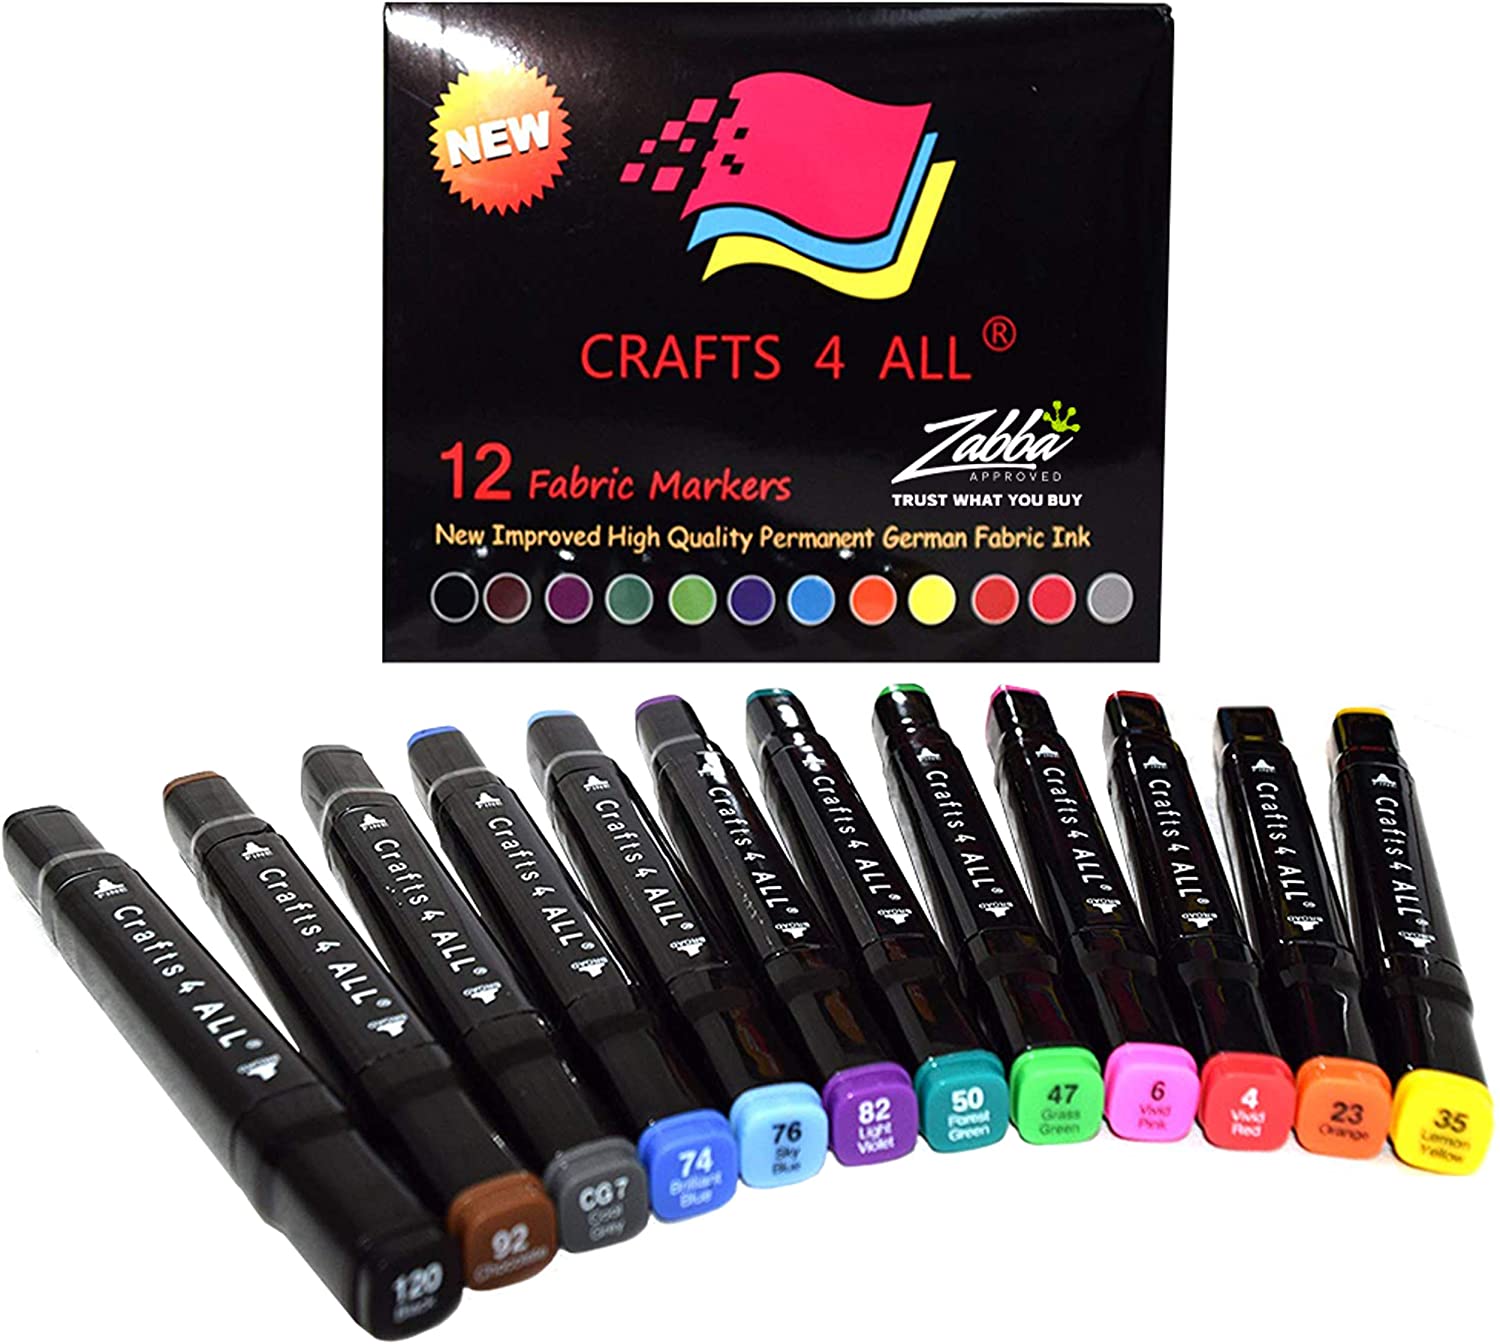 Crafts 4 ALL Fabric Markers Pens